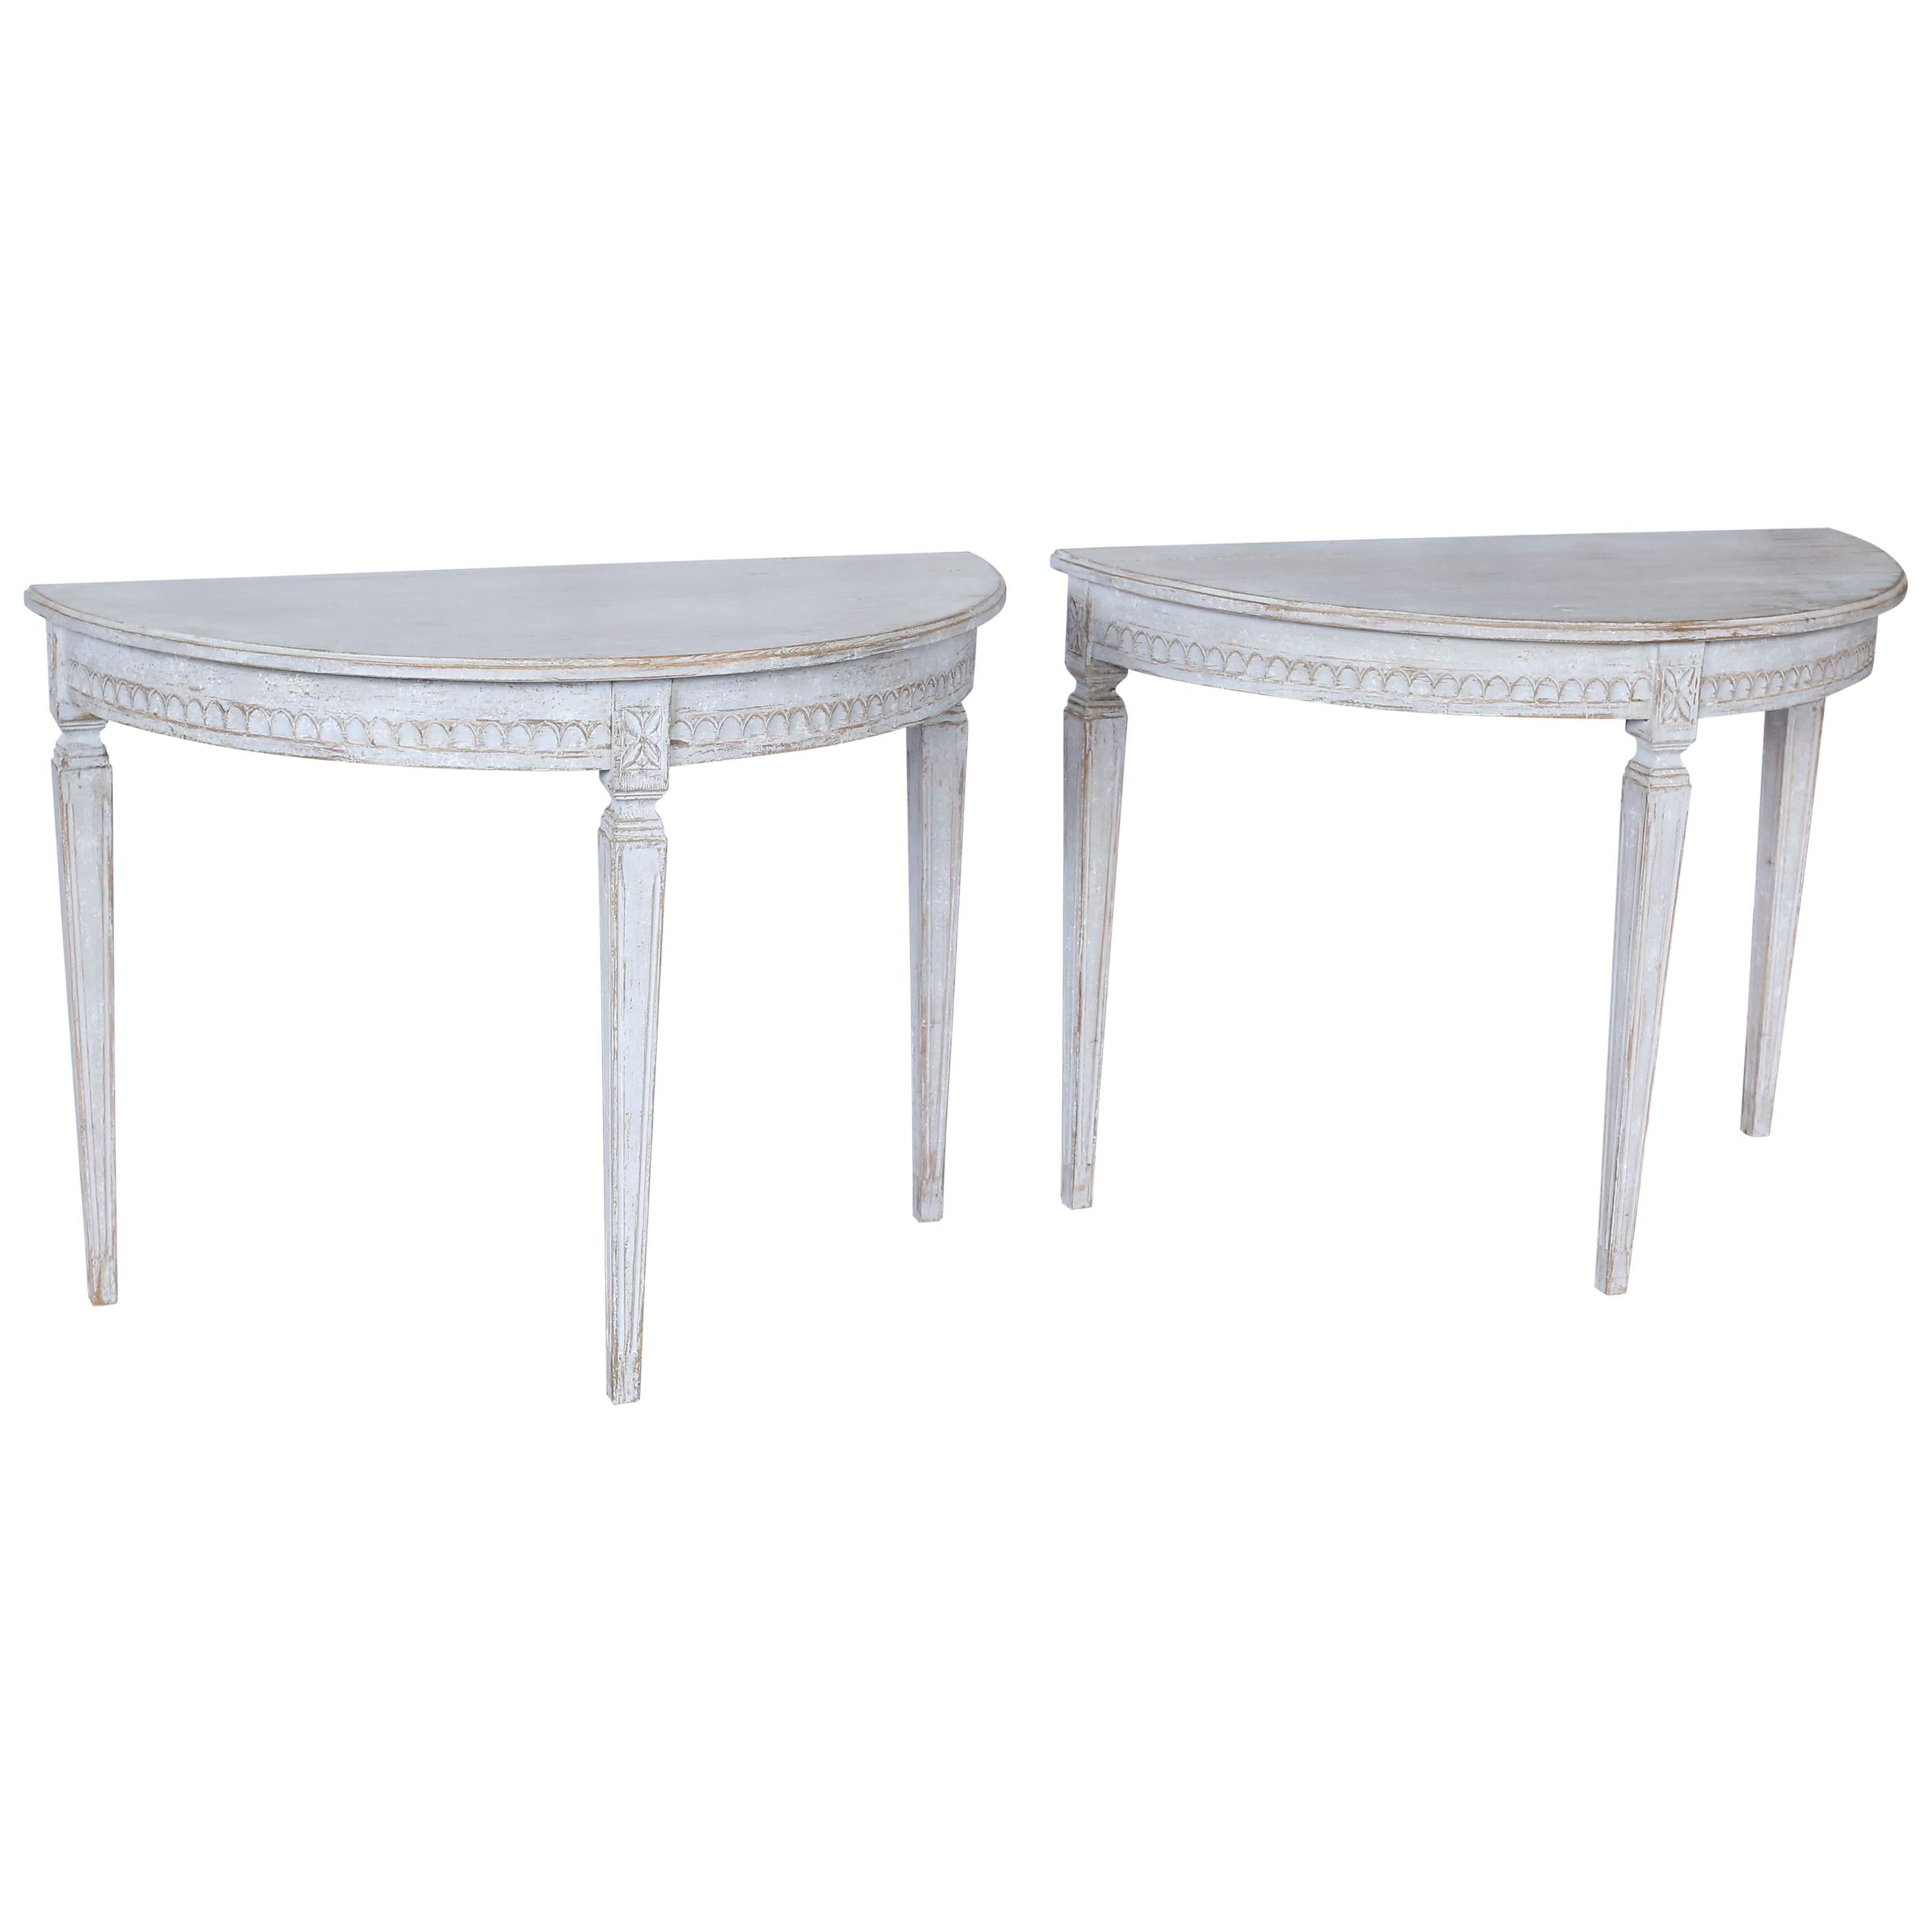 Pair of 19th Century Swedish Gustavian Demilune Tables For Sale